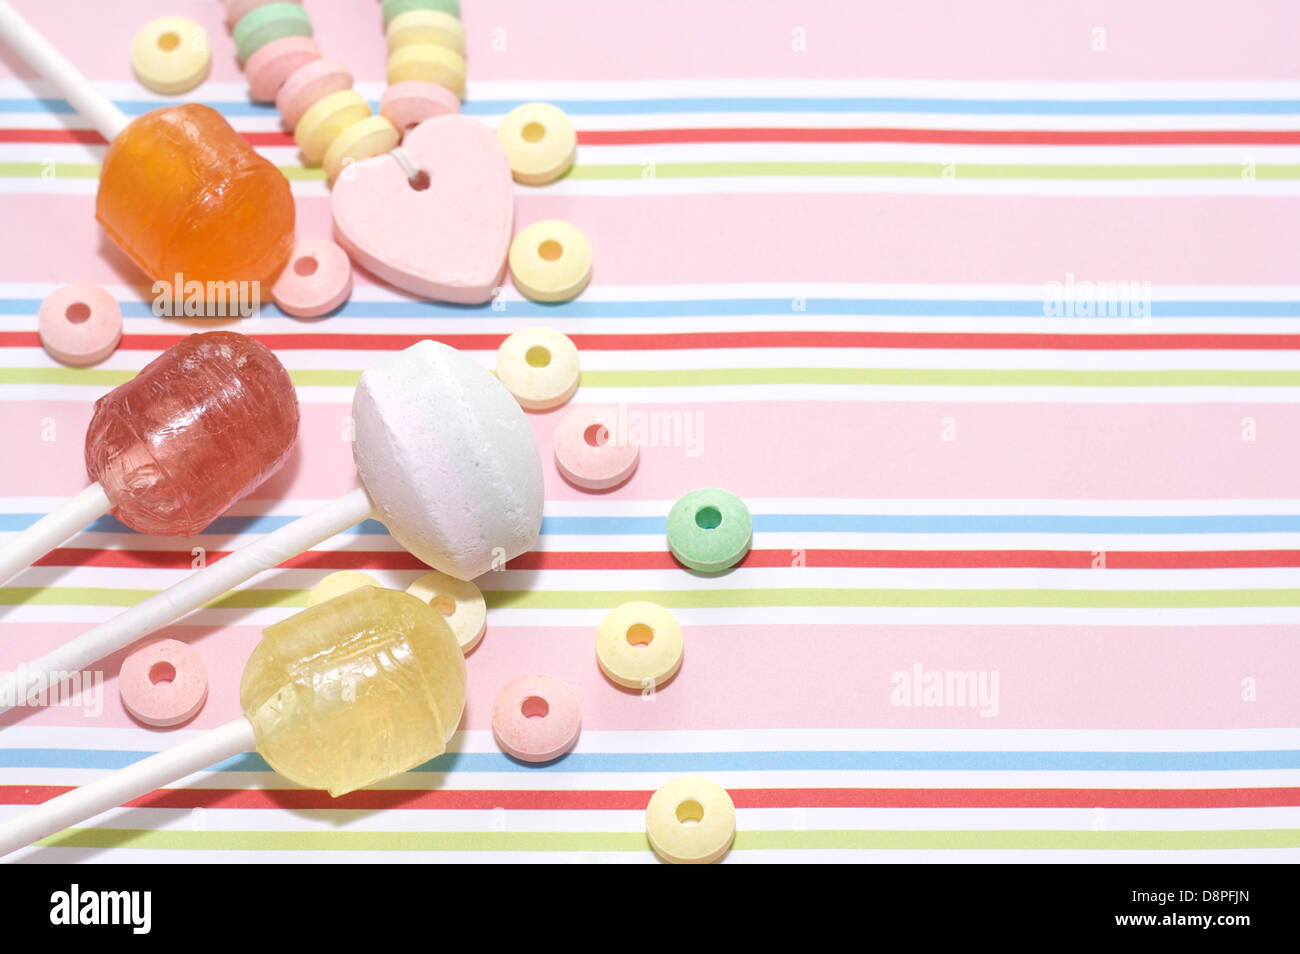 Lollies and sweets on striped background  1 Stock Photo